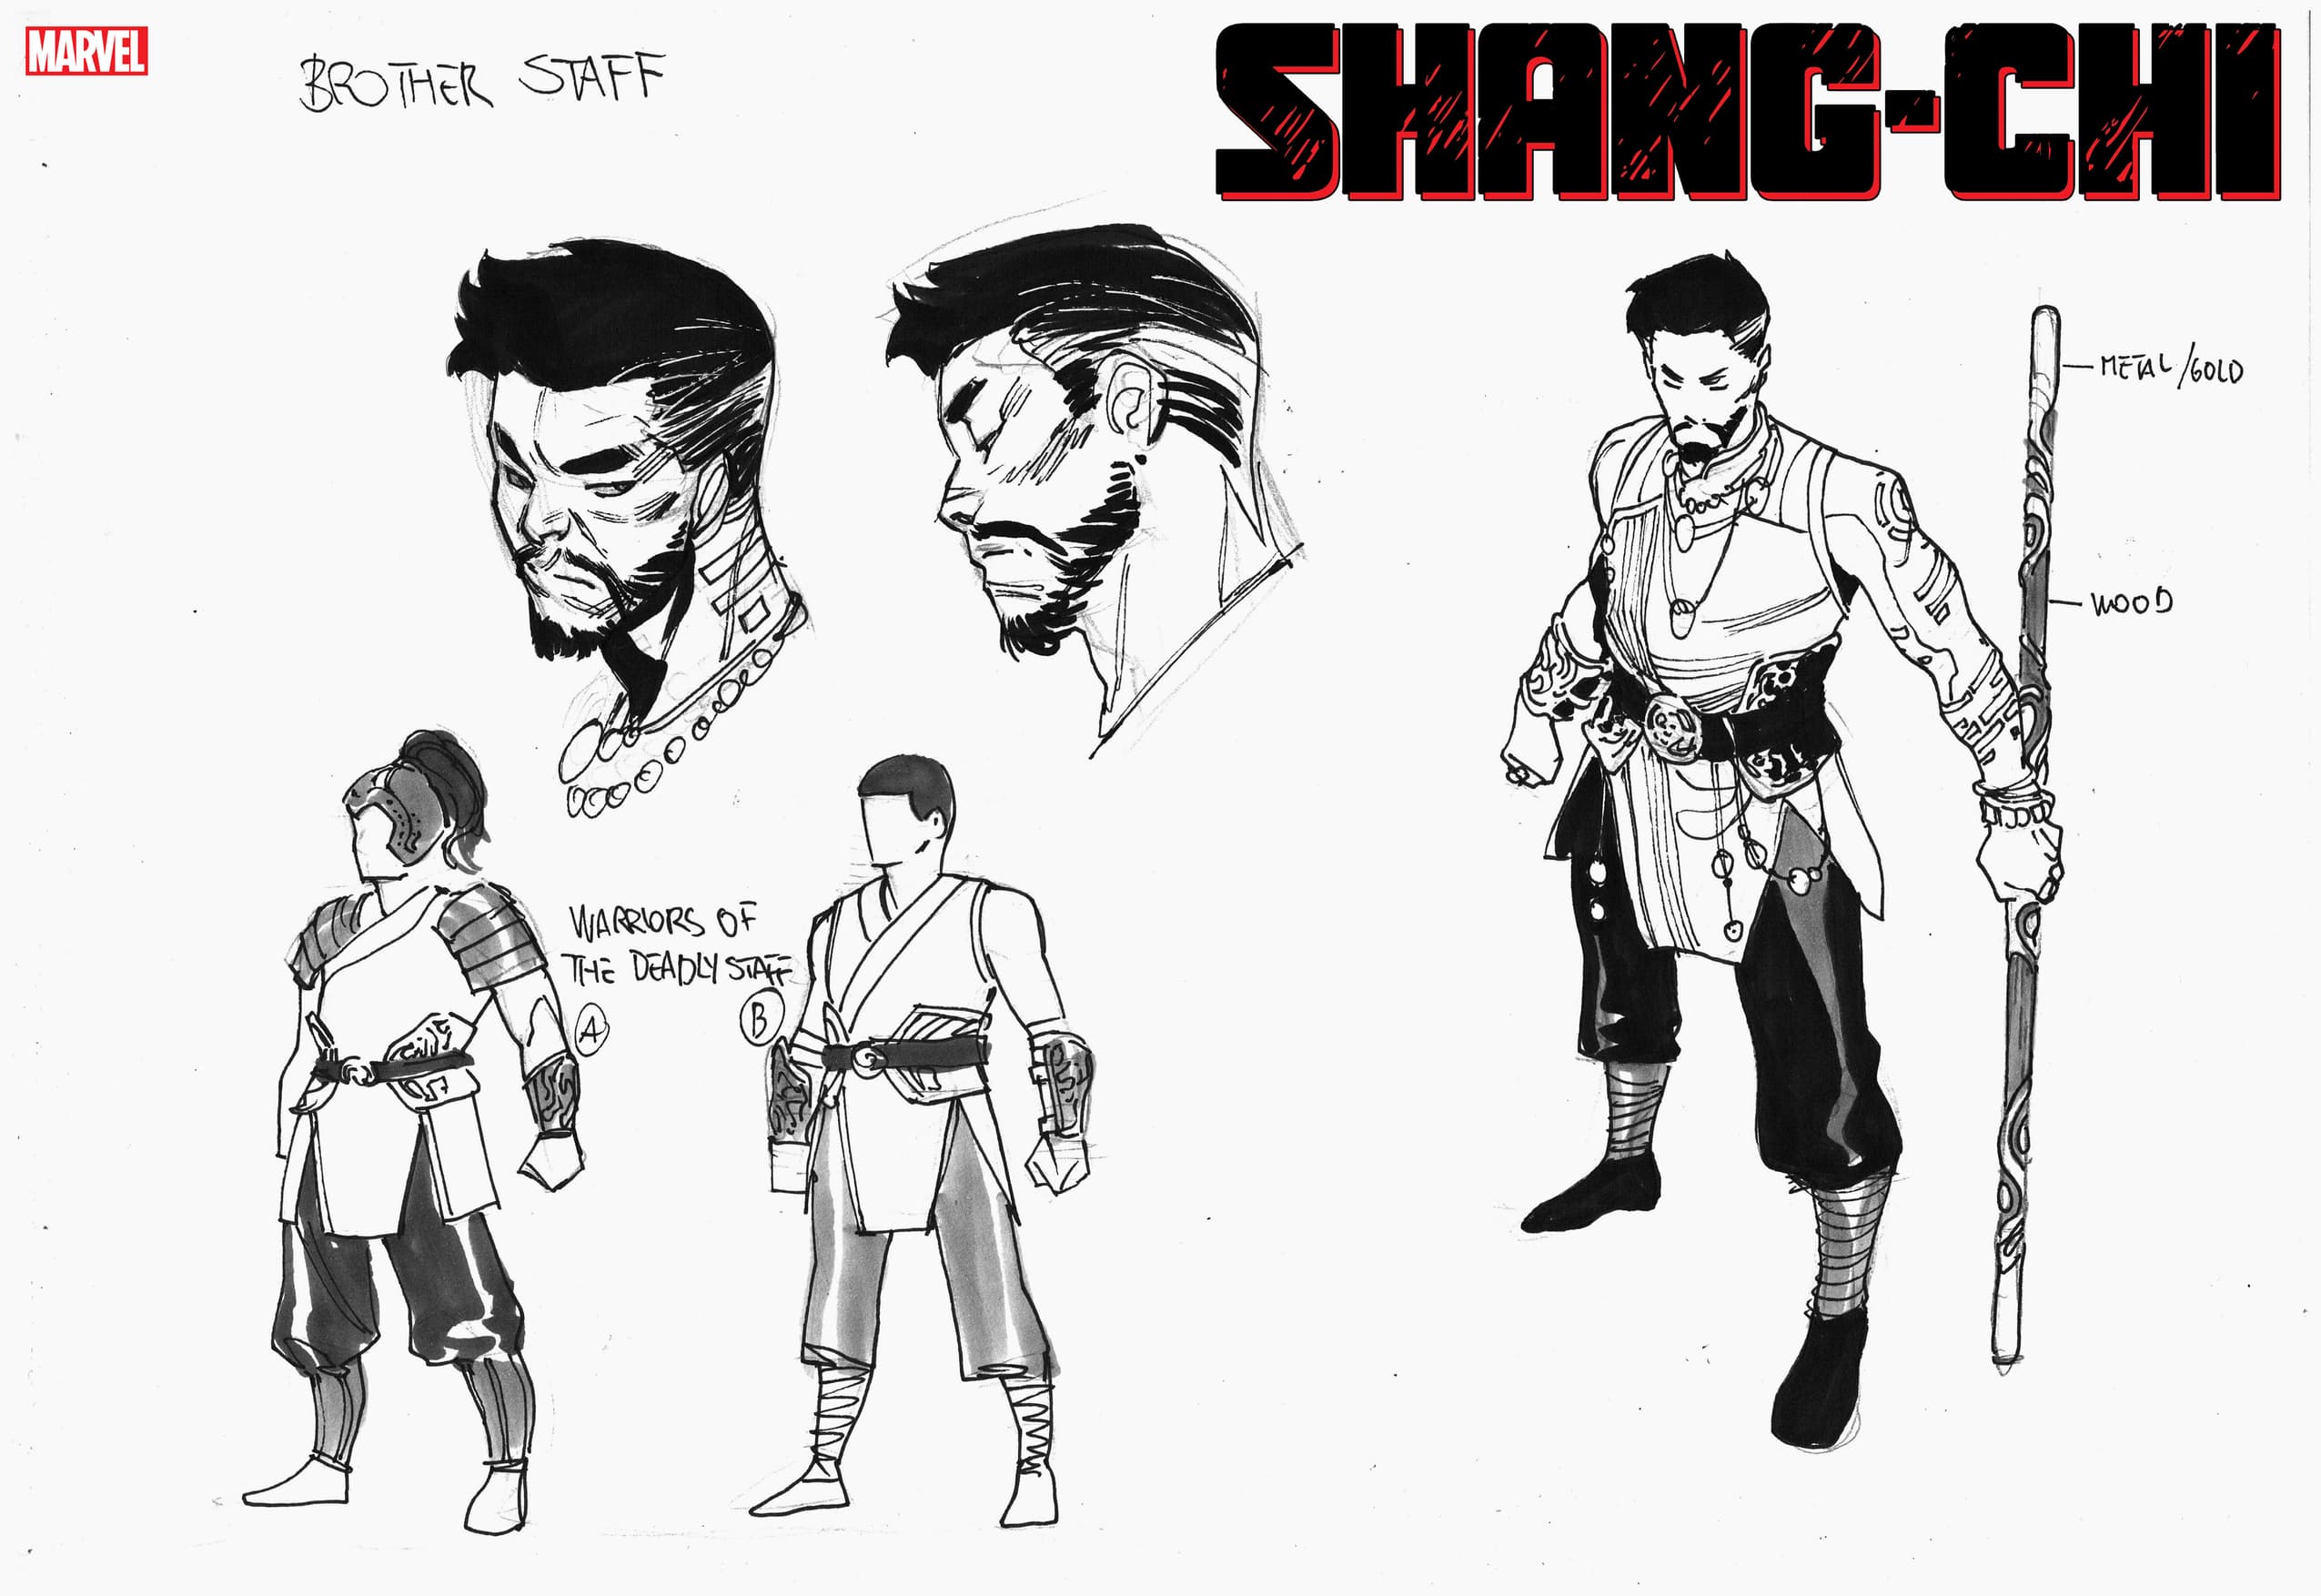 Shang-Chi Brother Staff character design